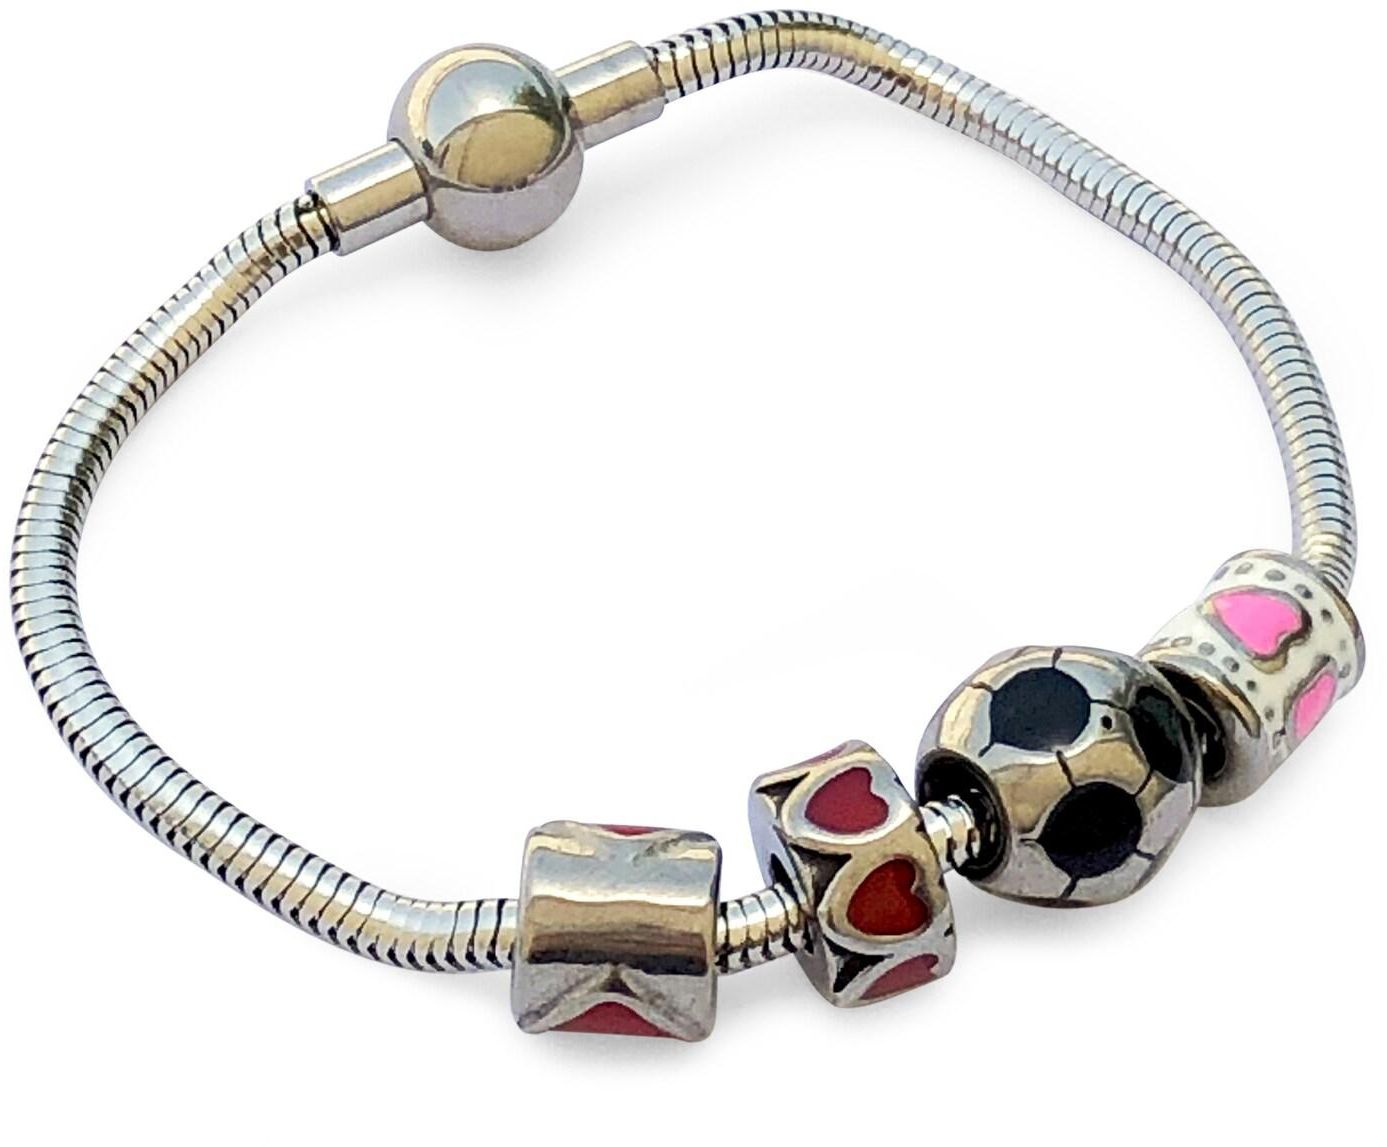 AIWANTO Pandora Style Beads Bracelet | European Style Stainless Steel Snake Chain Charm Bracelet with Snap Clasp for Women Ladies